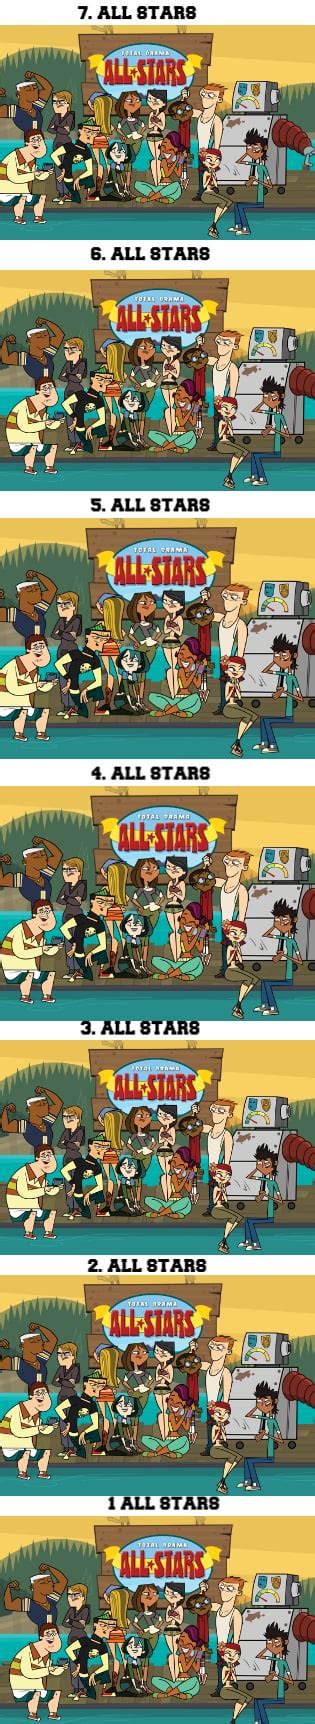 All Total Drama Seasons Ranked Worst To Best Totaldrama